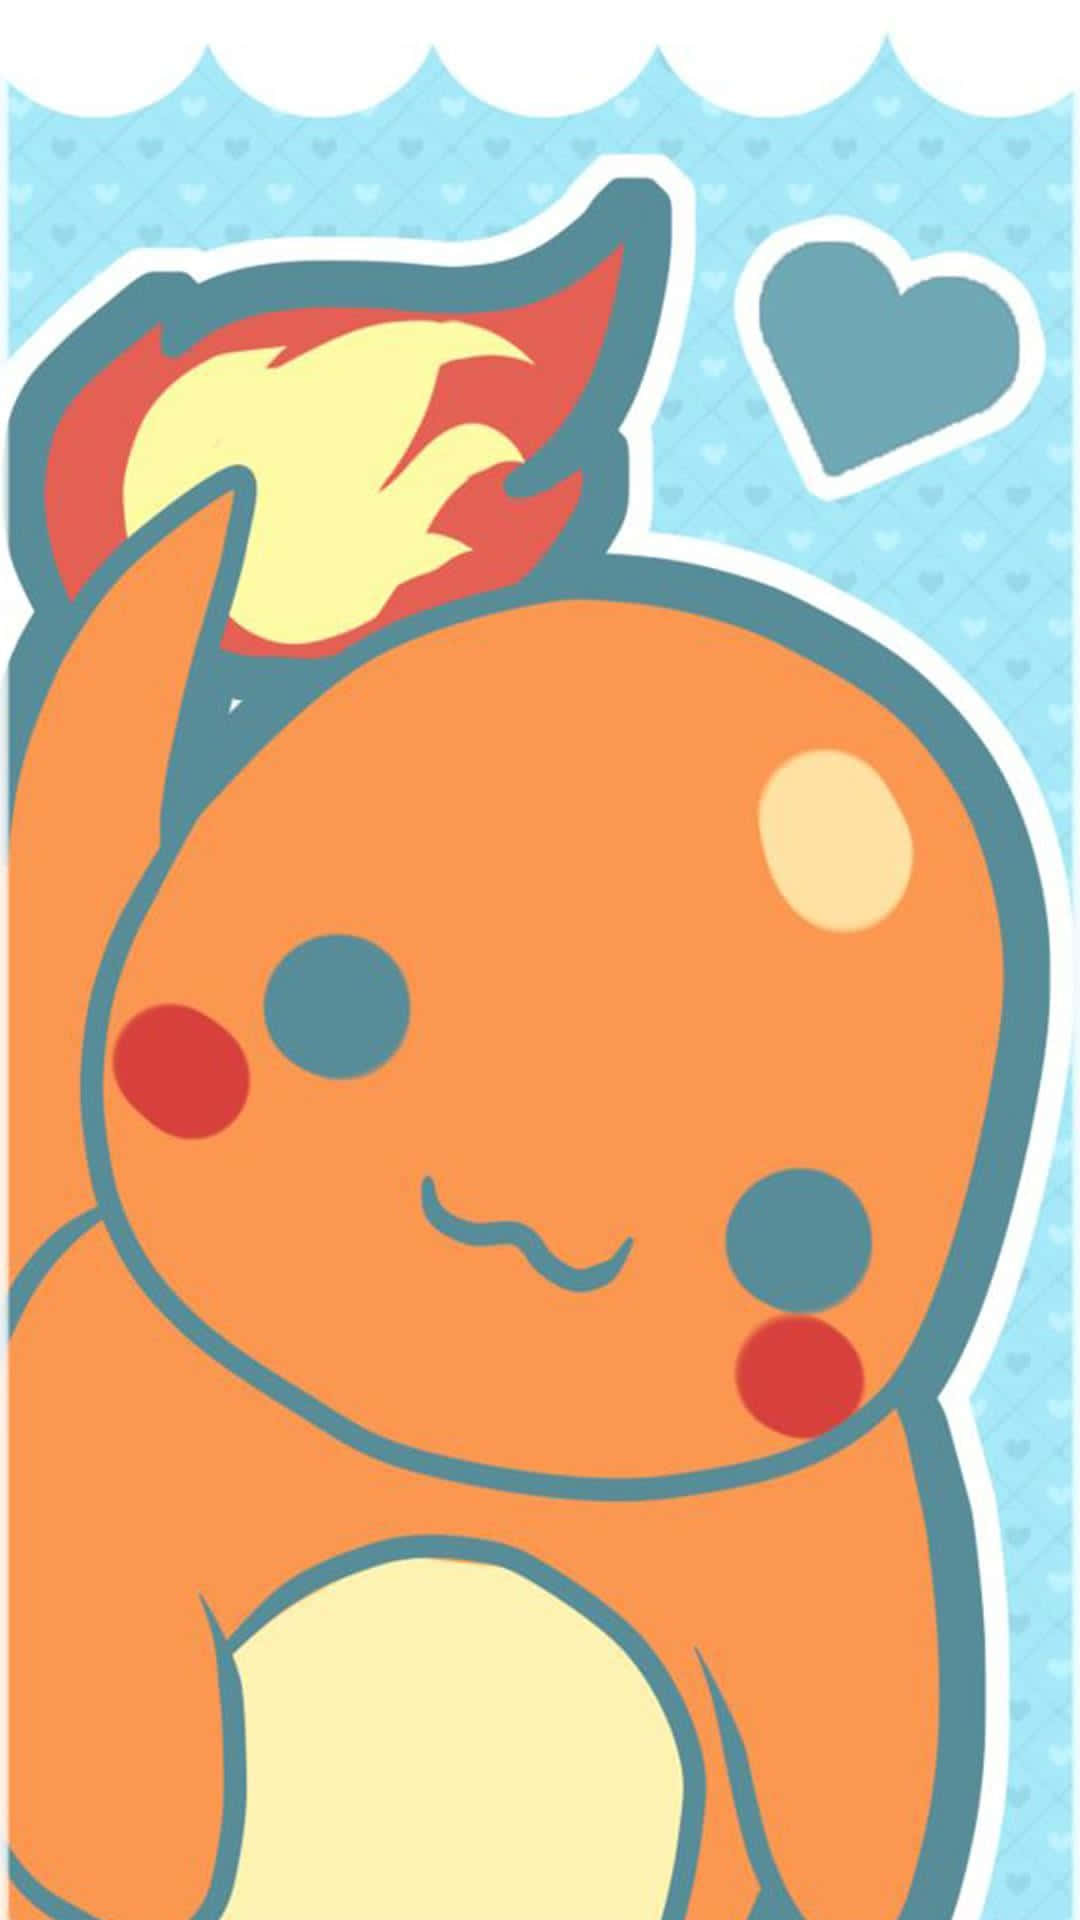 "Brighten up your day with this adorable Cute Charmander!” Wallpaper